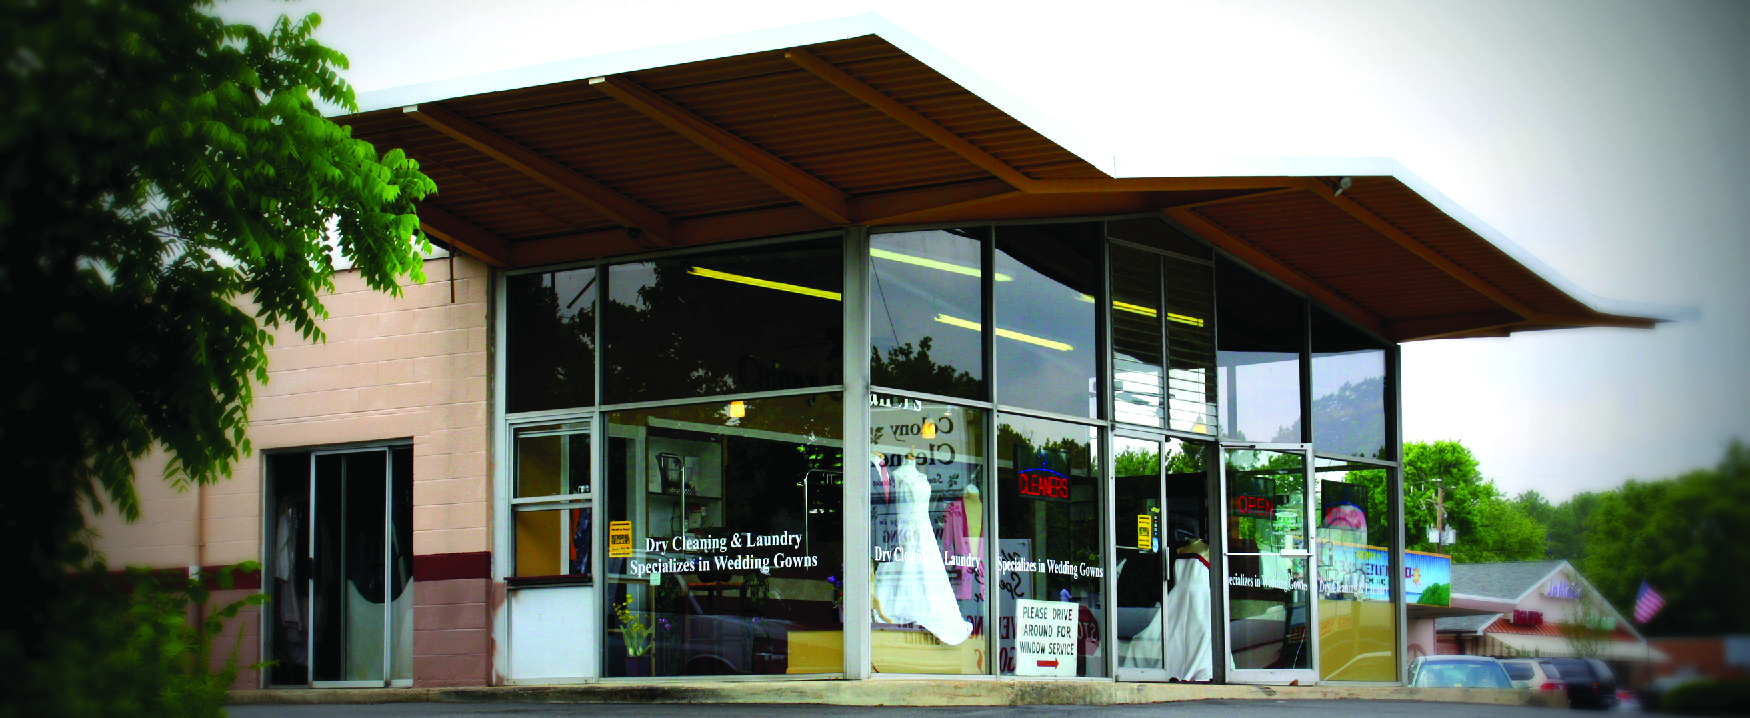 Exterior photograph of dry-cleaning business.